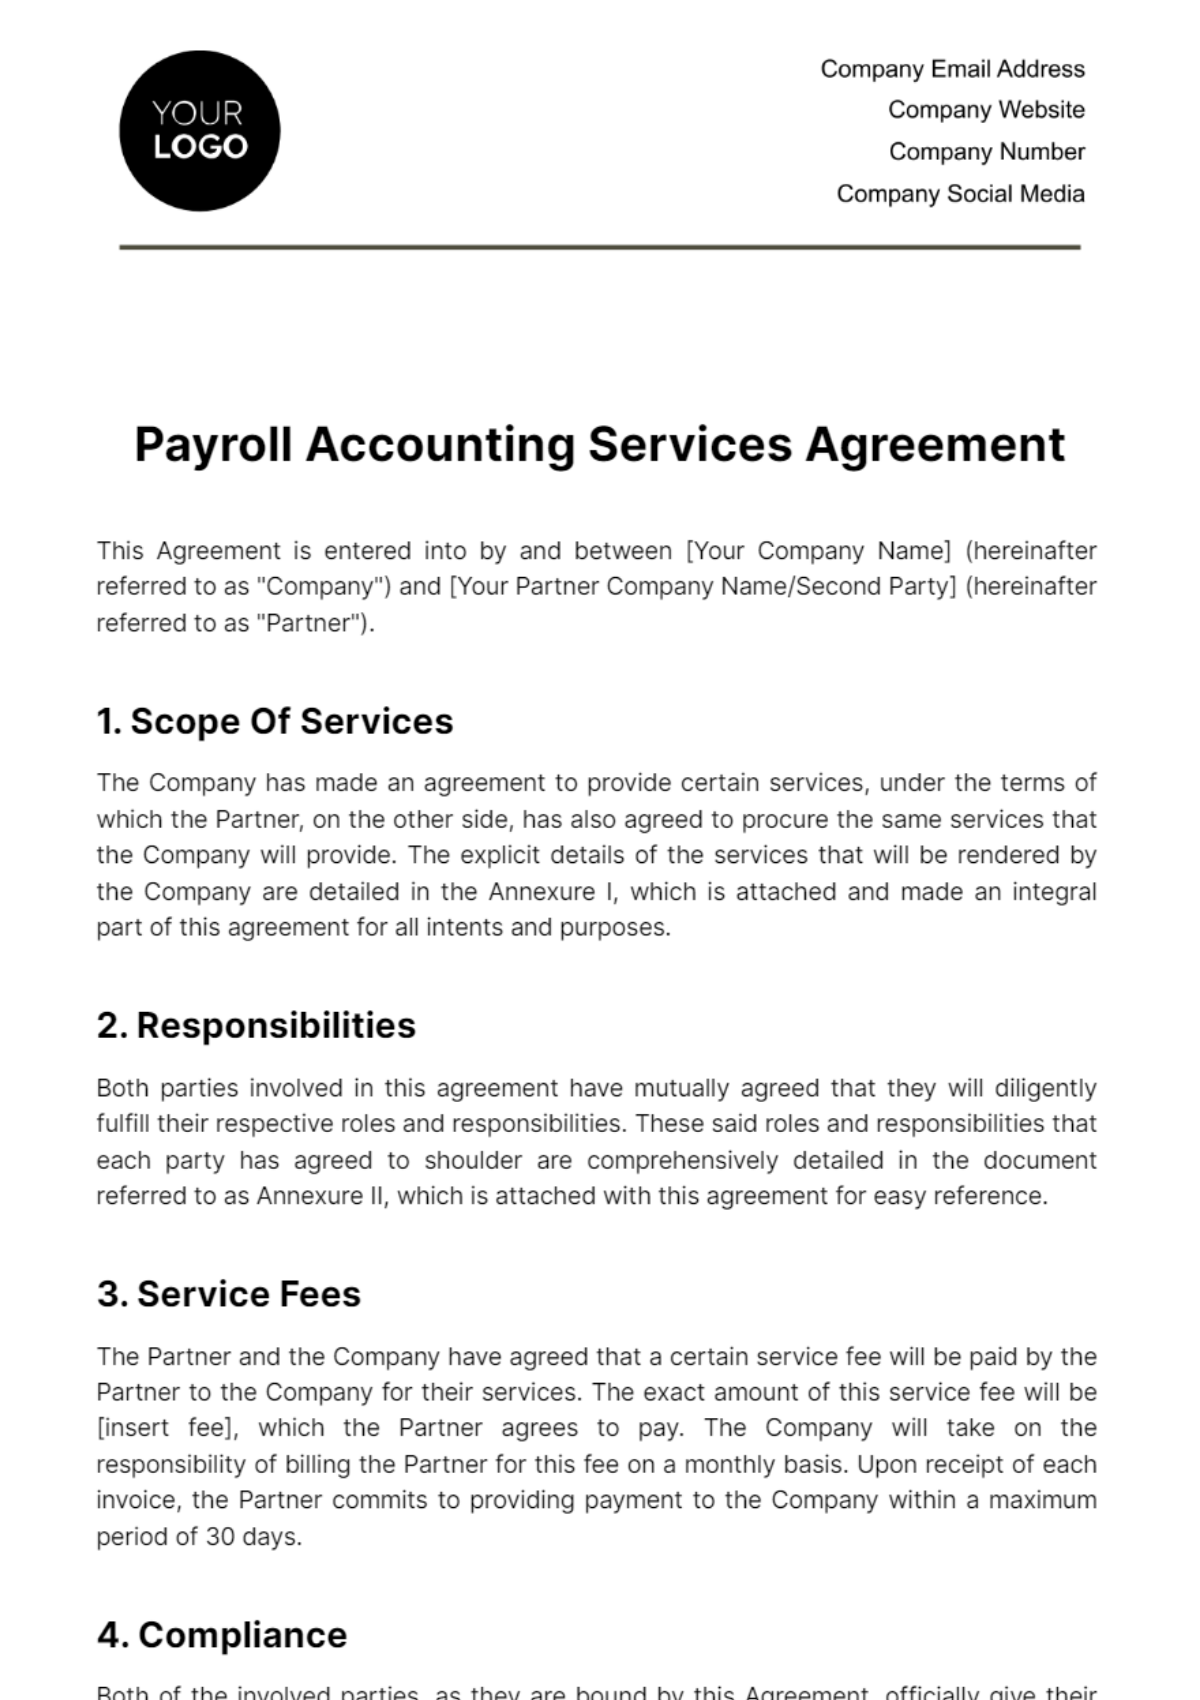 Free Payroll Accounting Services Agreement Template